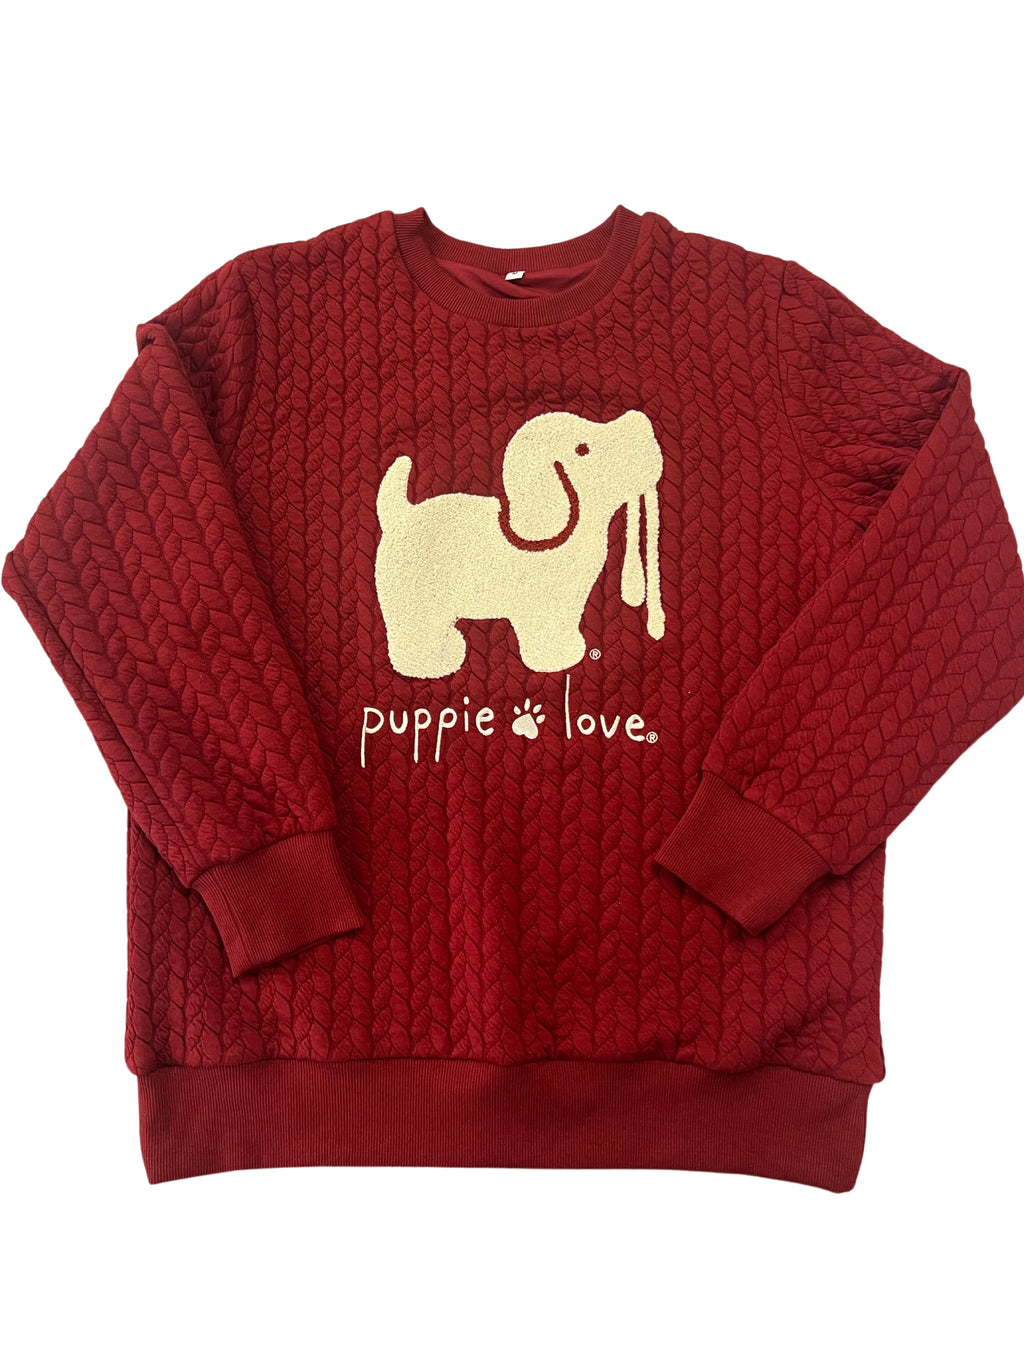 CHENILLE EMBROIDERED SWEATER, MAROON - Puppie Love